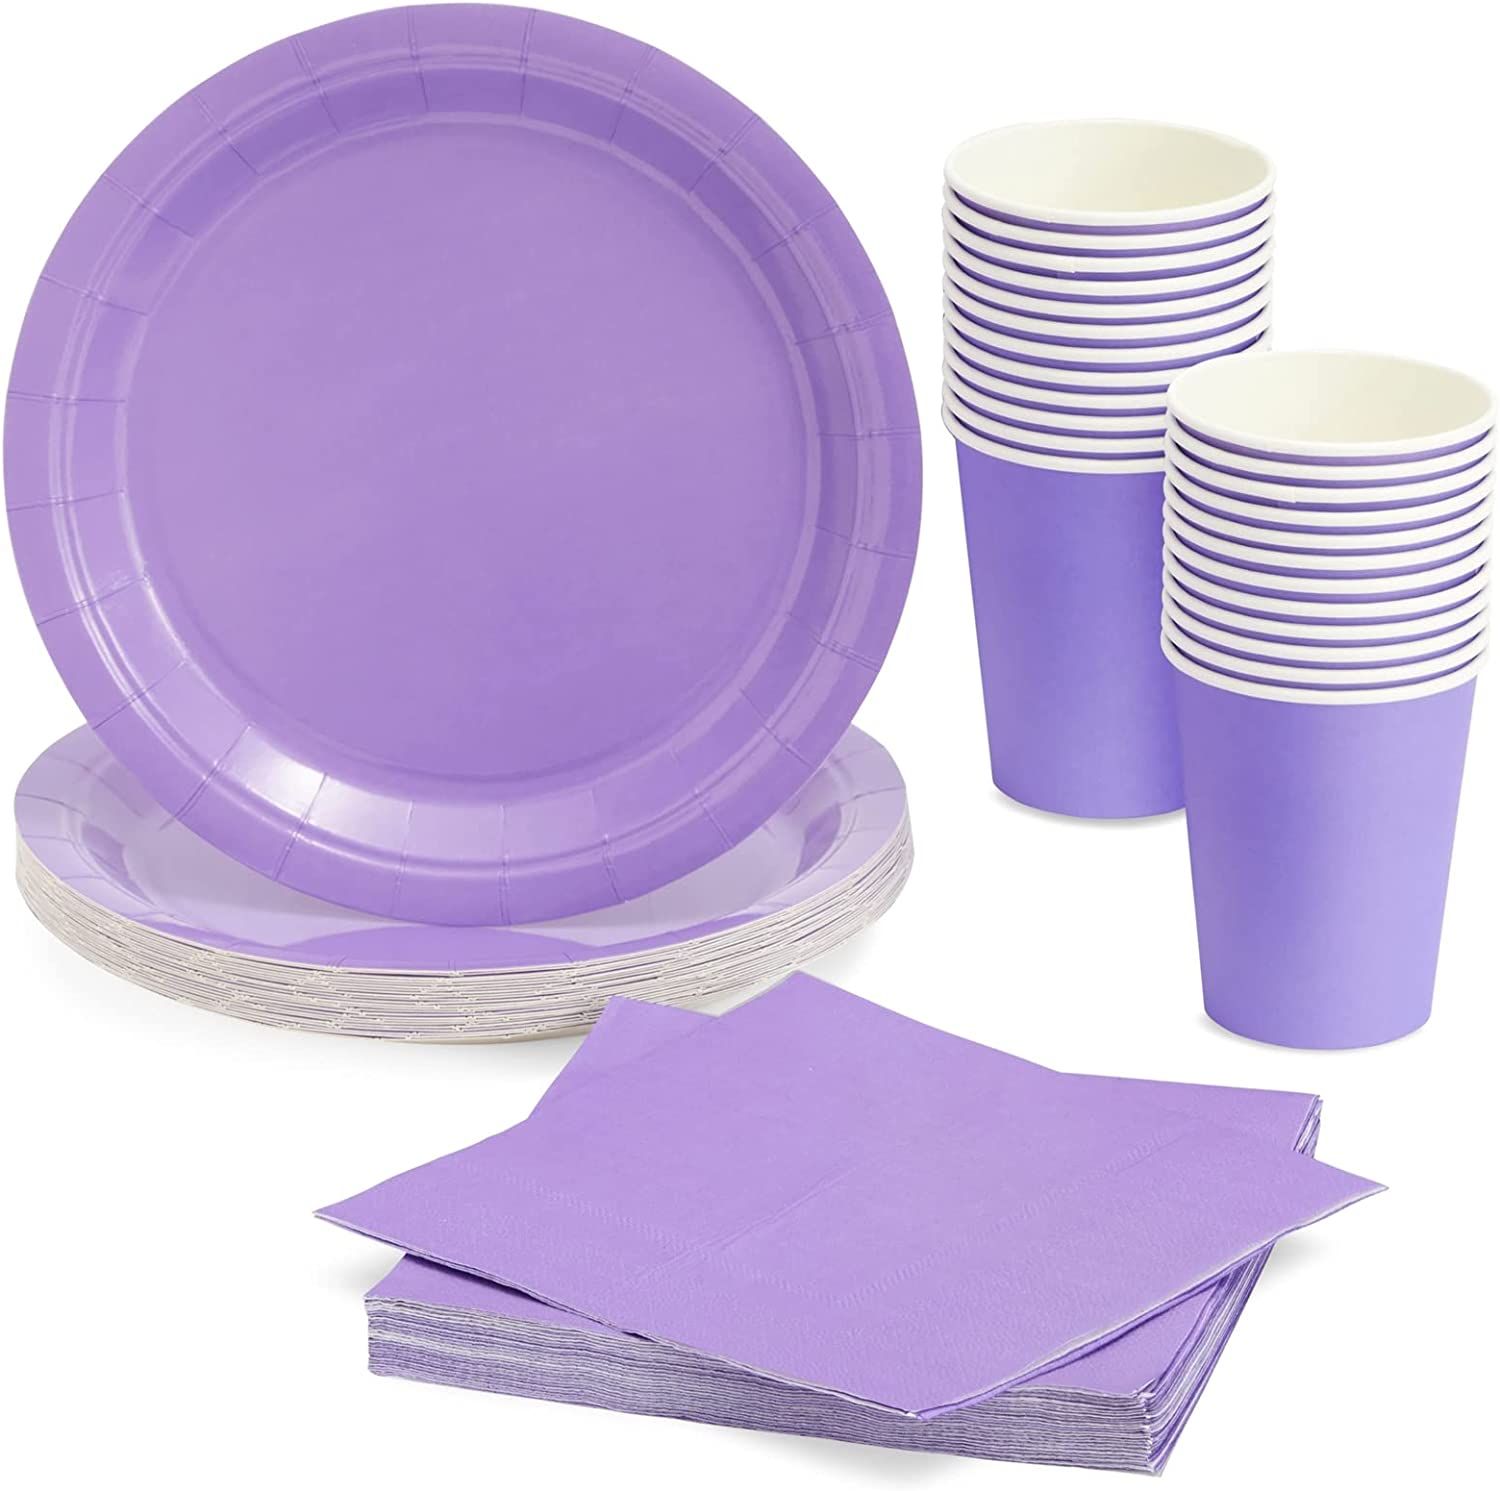 72 Pieces of Purple Party Supplies with Paper Plates, Cups, and Napkins for Birthday Decorations ... | Amazon (US)